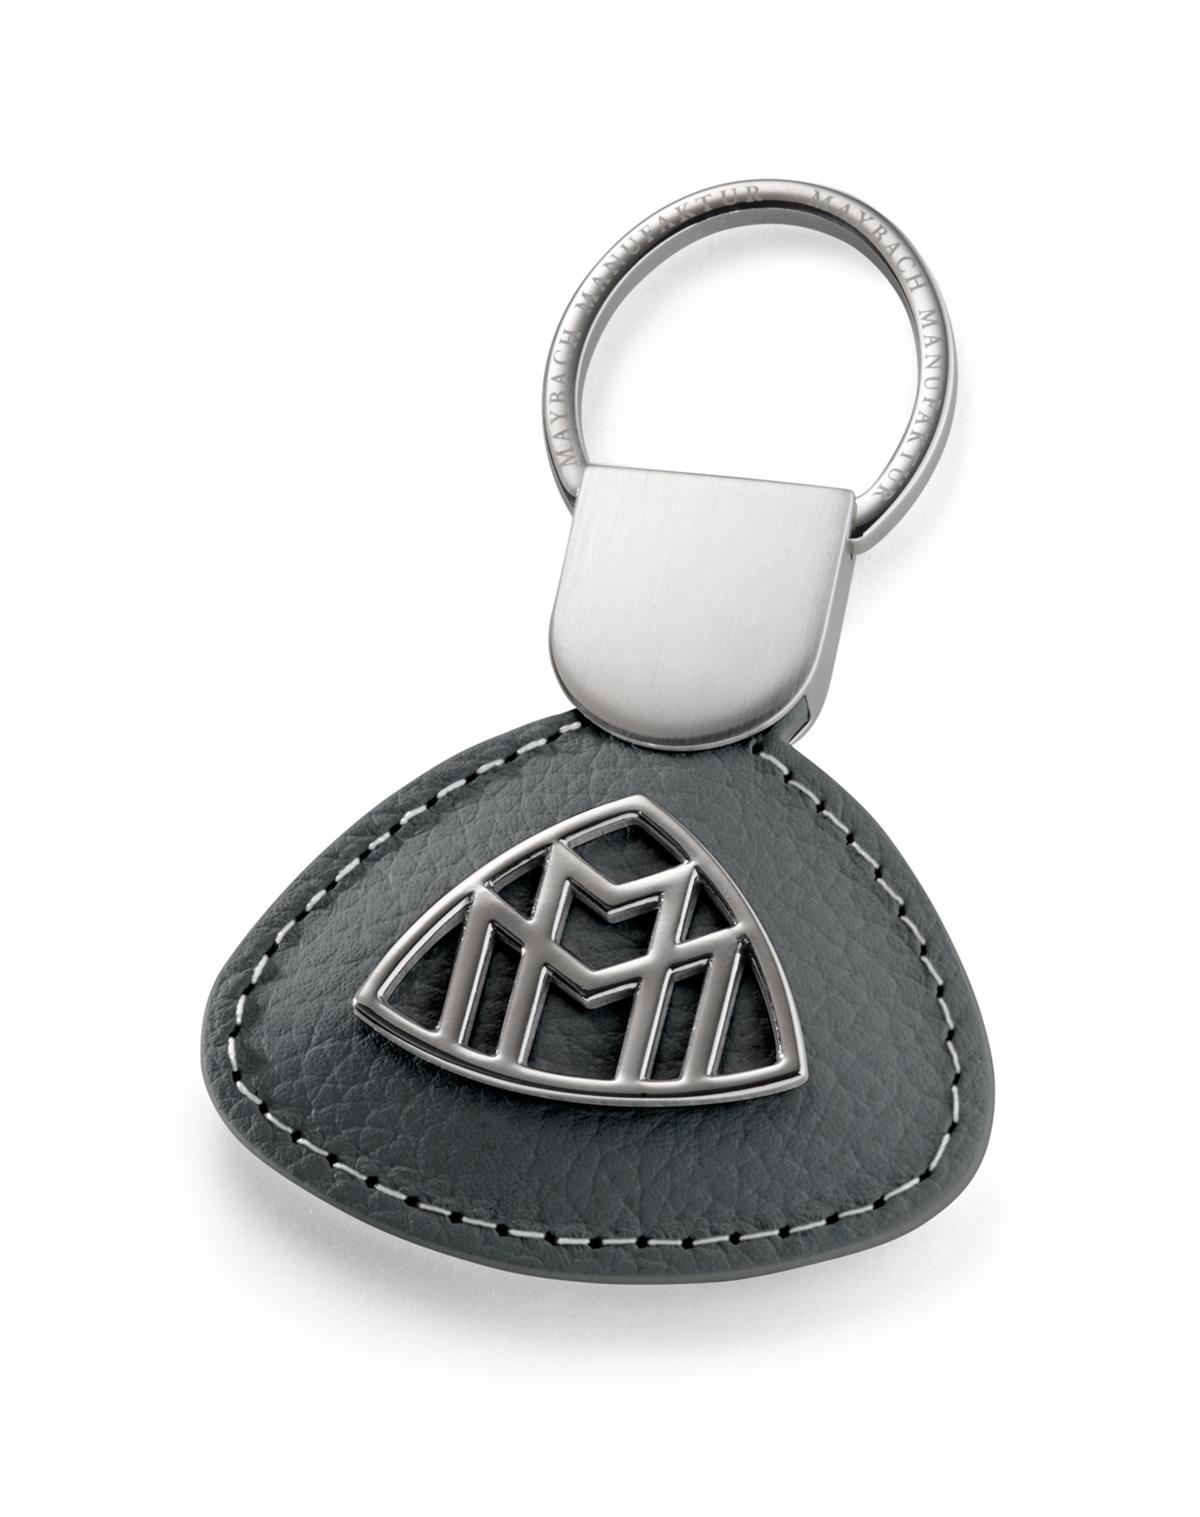 OPTIC HOUSE_MAYBACH Boutique 79 THE RELEASE I Keyring titanium grey pearl